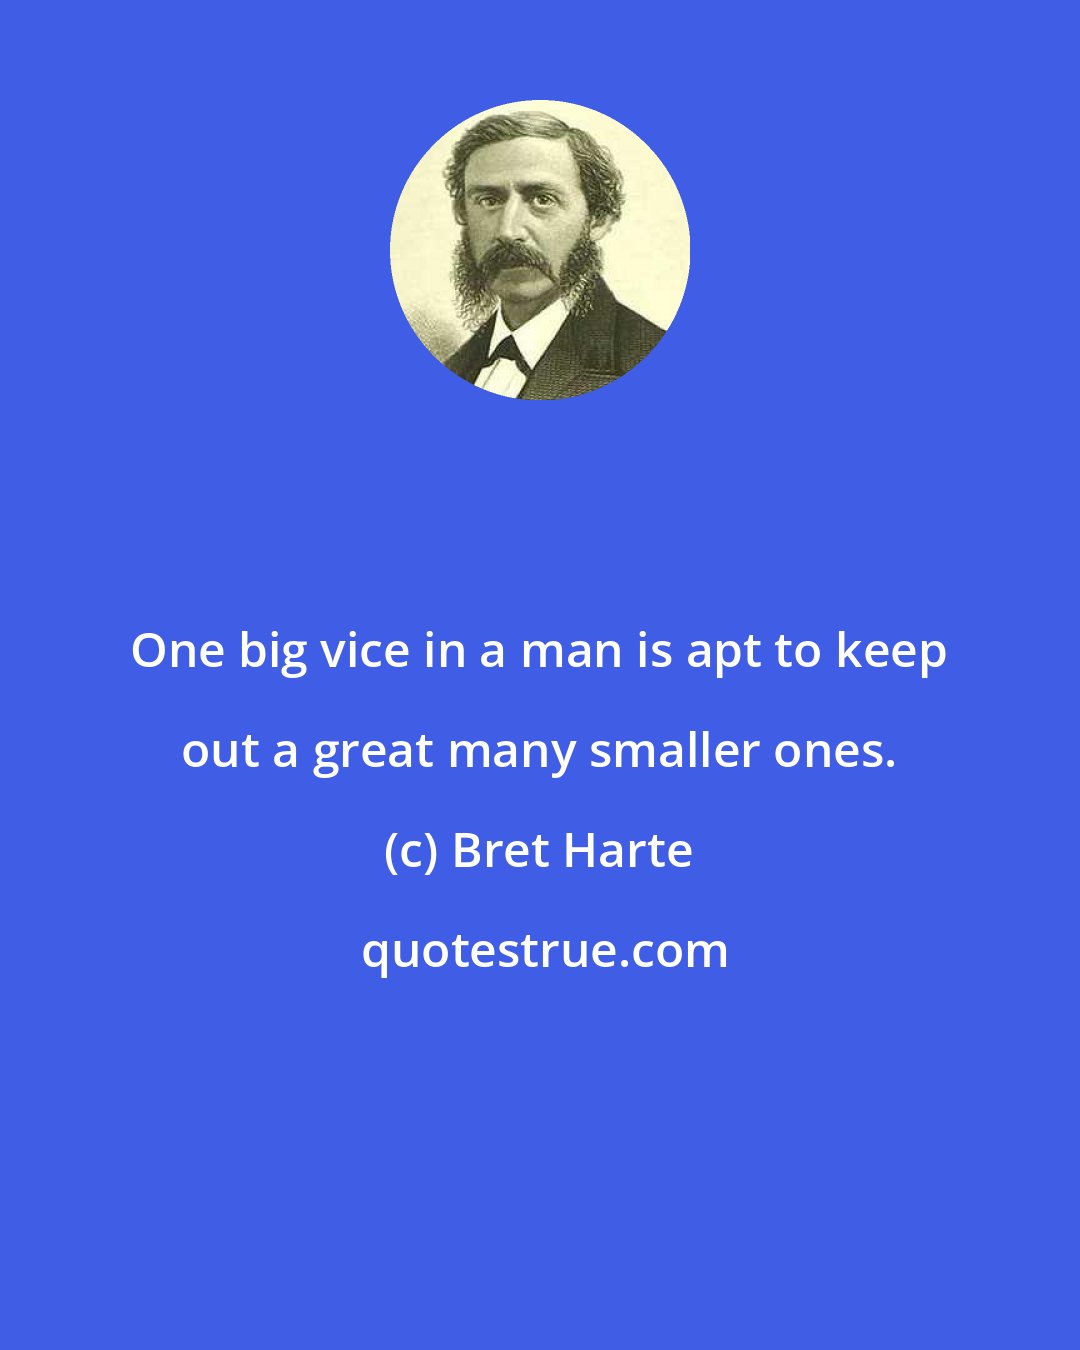 Bret Harte: One big vice in a man is apt to keep out a great many smaller ones.